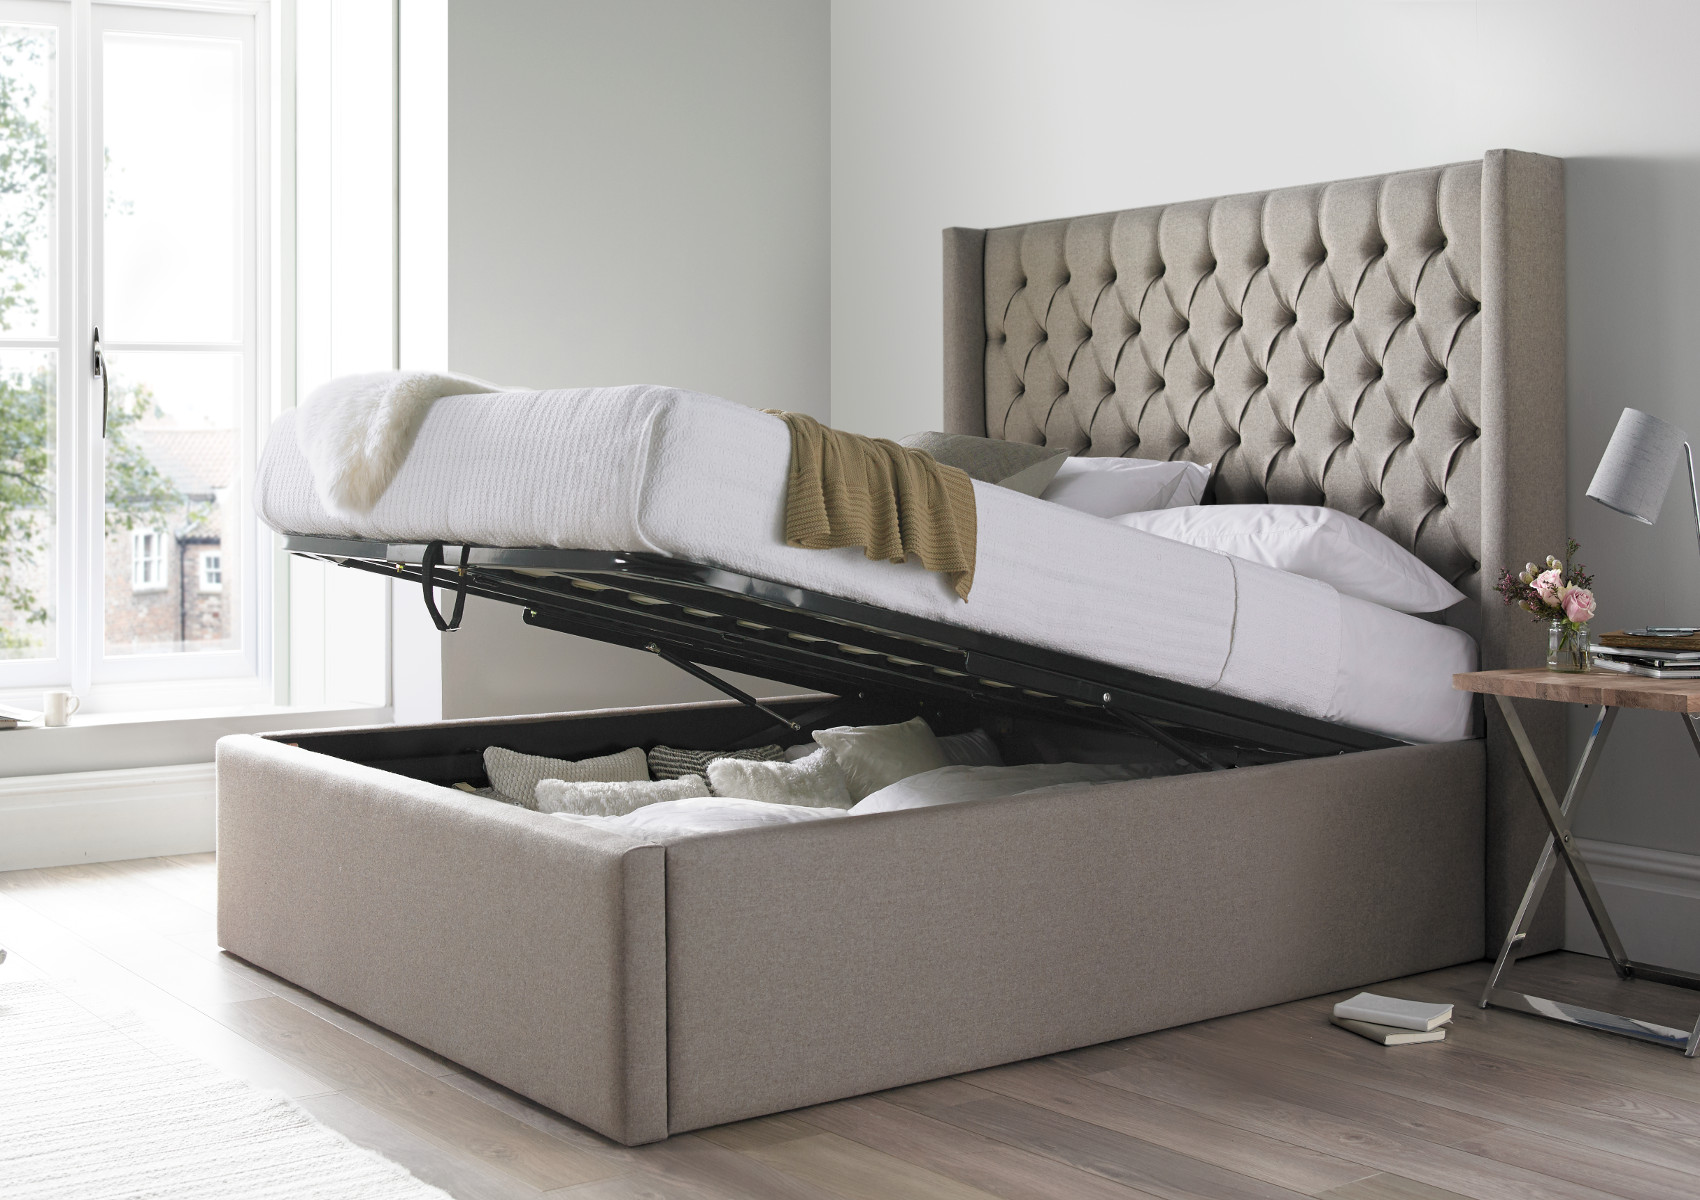 View Islington Naples Silver Upholstered King Size Ottoman Bed Time4Sleep information